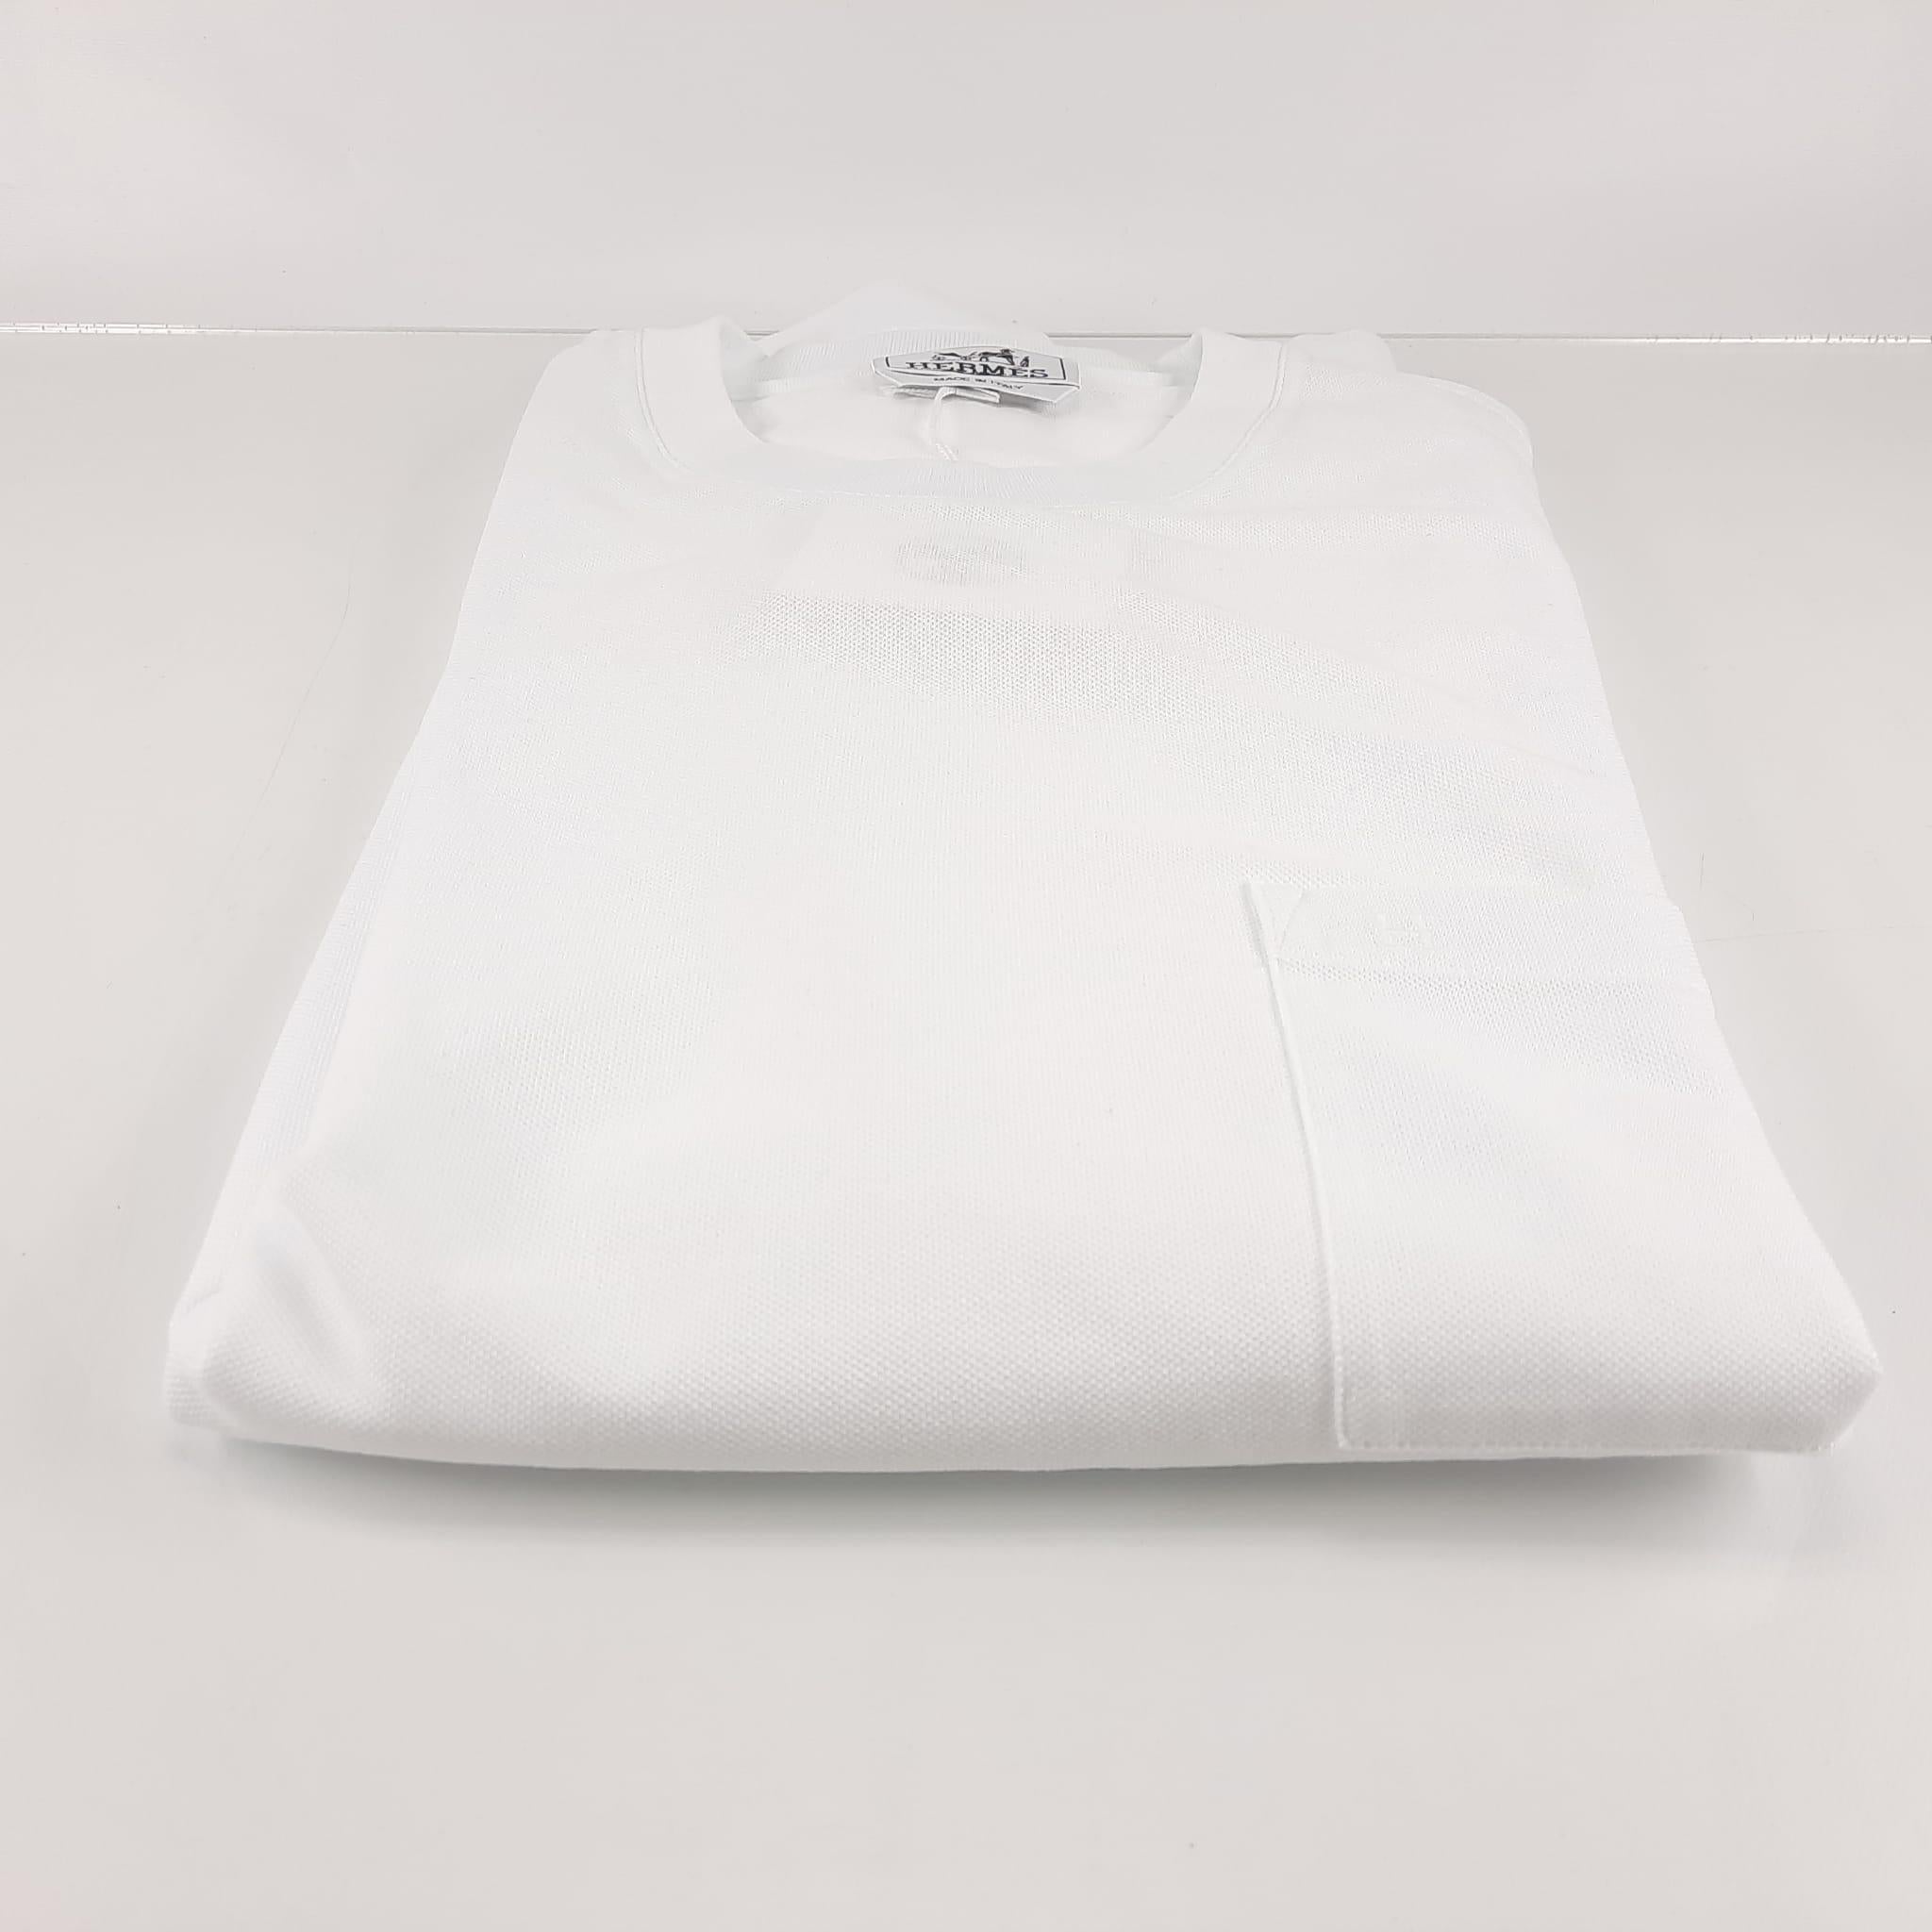 Size L
Short sleeve crewneck t-shirt in cotton pique with 